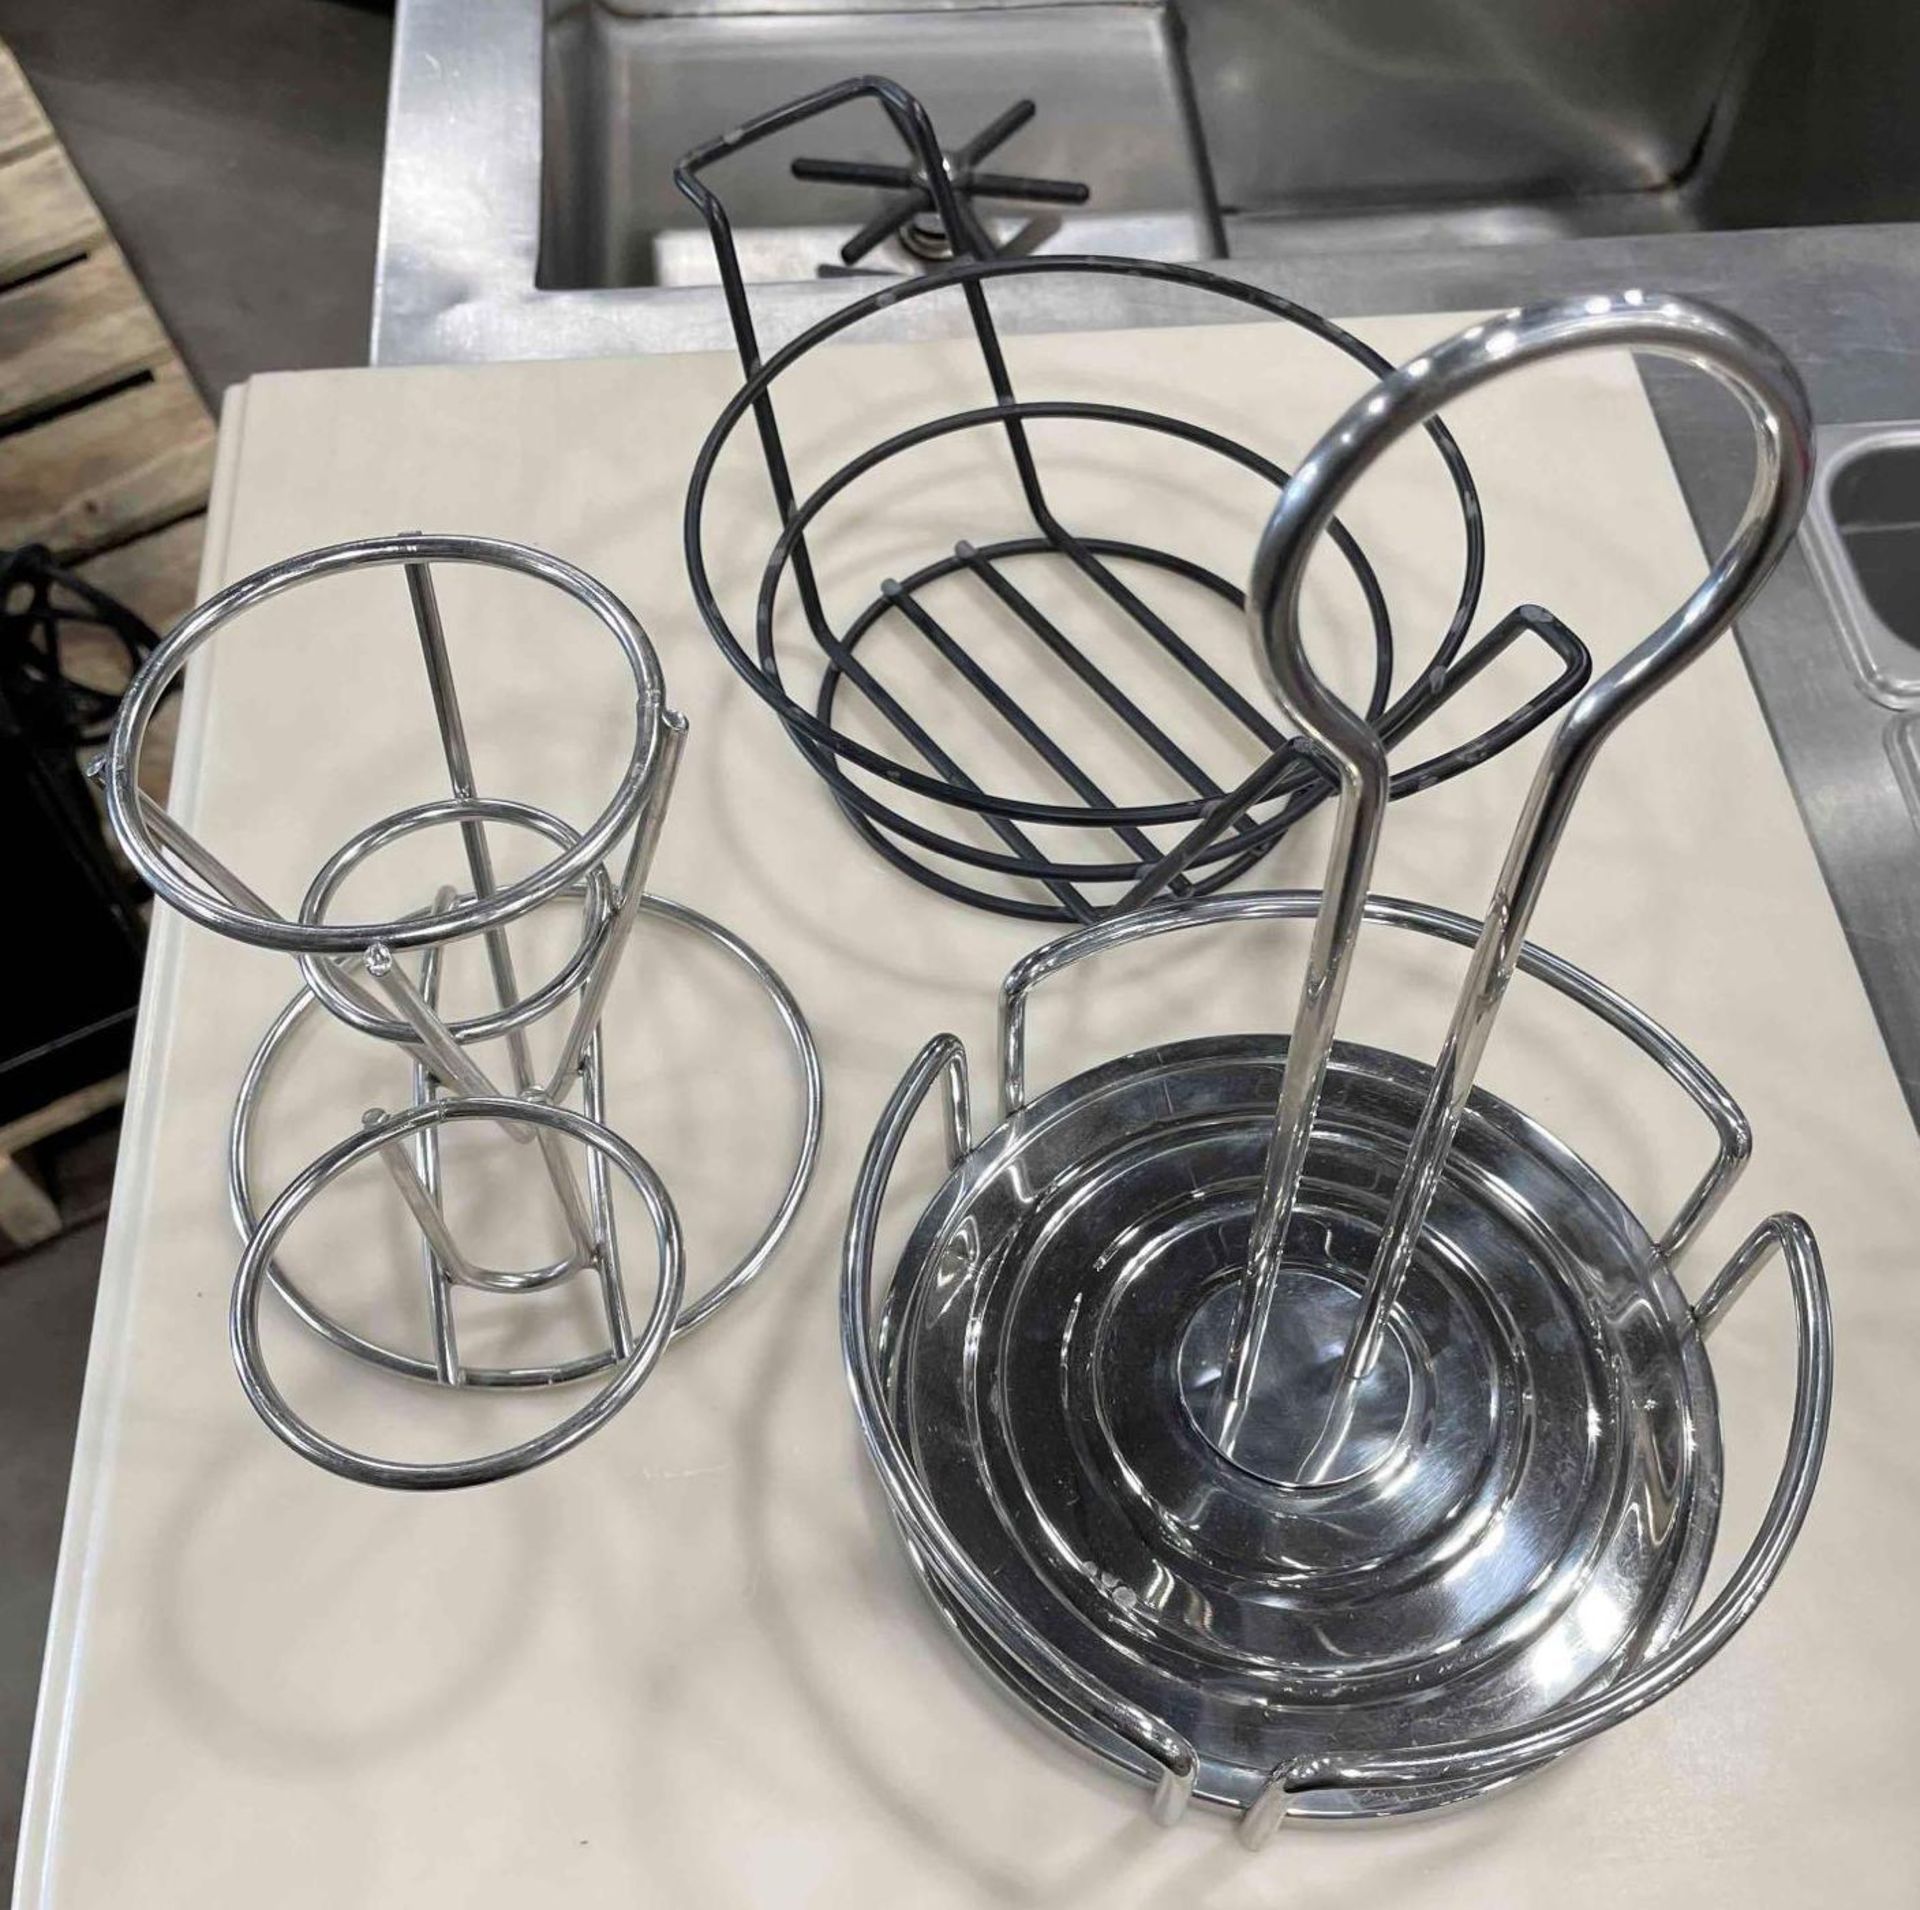 (10) STAINLESS STEEL FRY CONE WITH HOLDER WITH (2) ROUND STAINLESS STEEL CONDIMENT CADDY & (4) ROUND